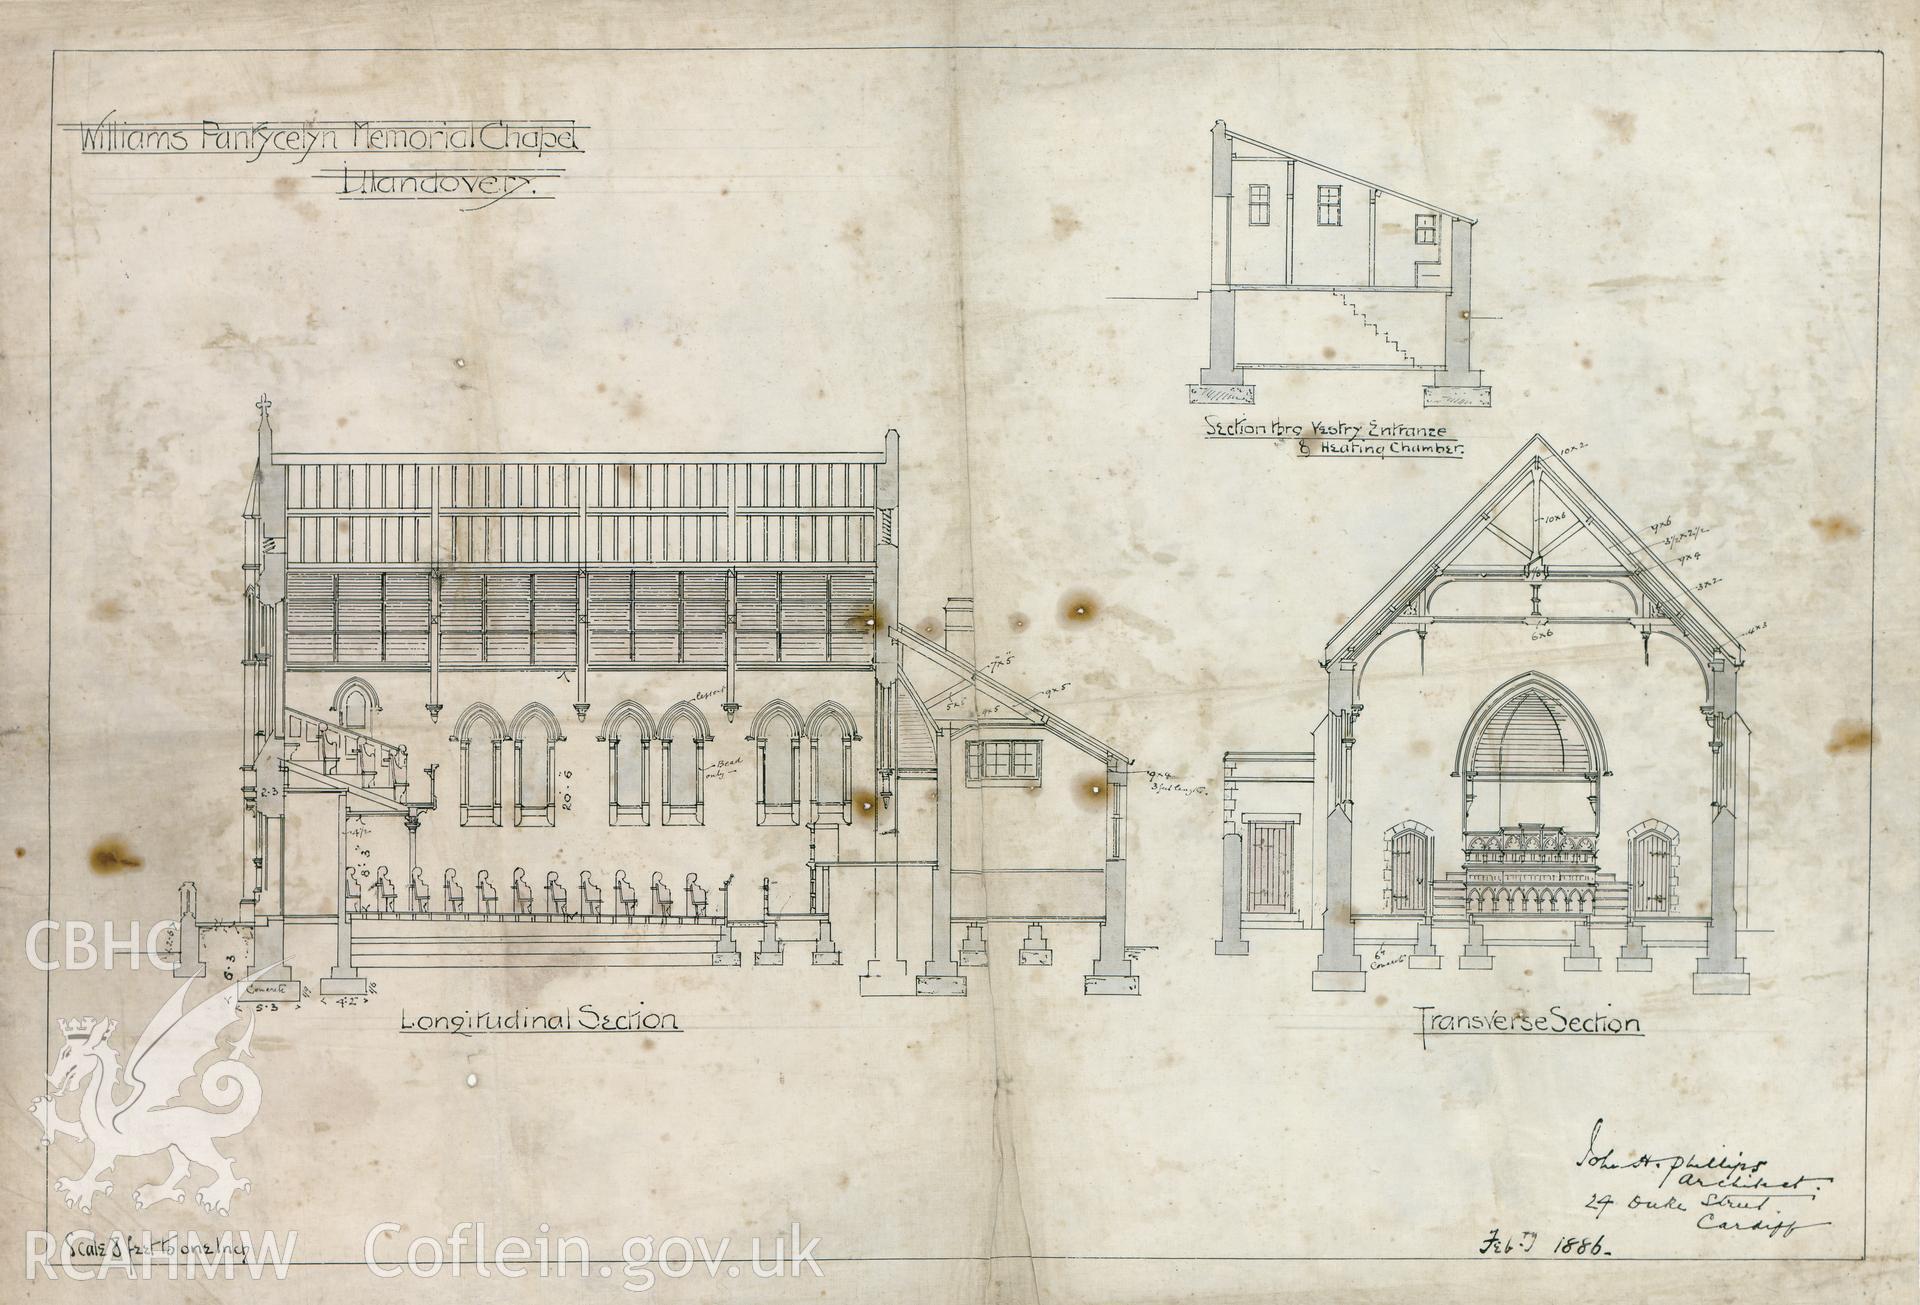 Measured section drawings of Williams Pantycelyn Chapel, dated 1886.